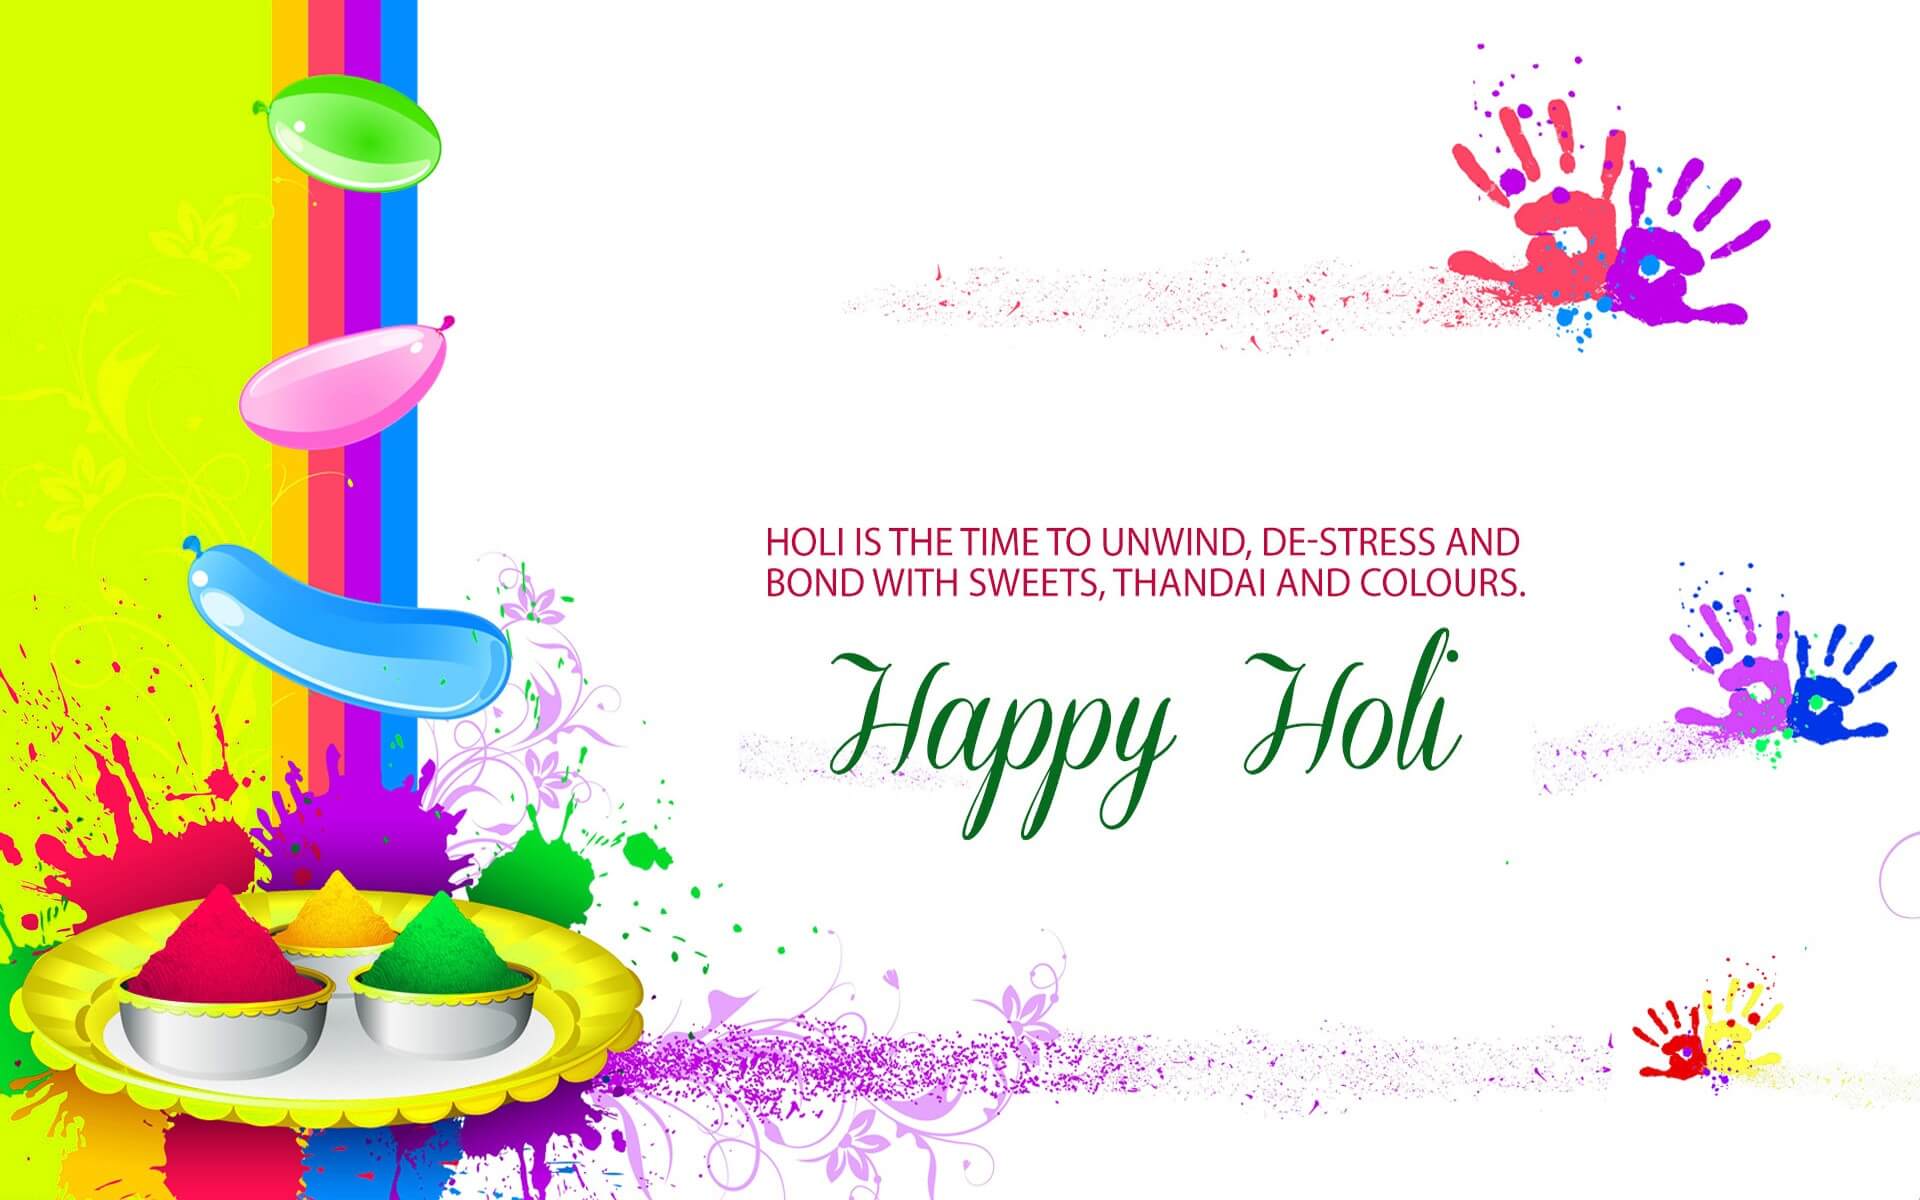 happy holi messages, wishes, quotes, sms